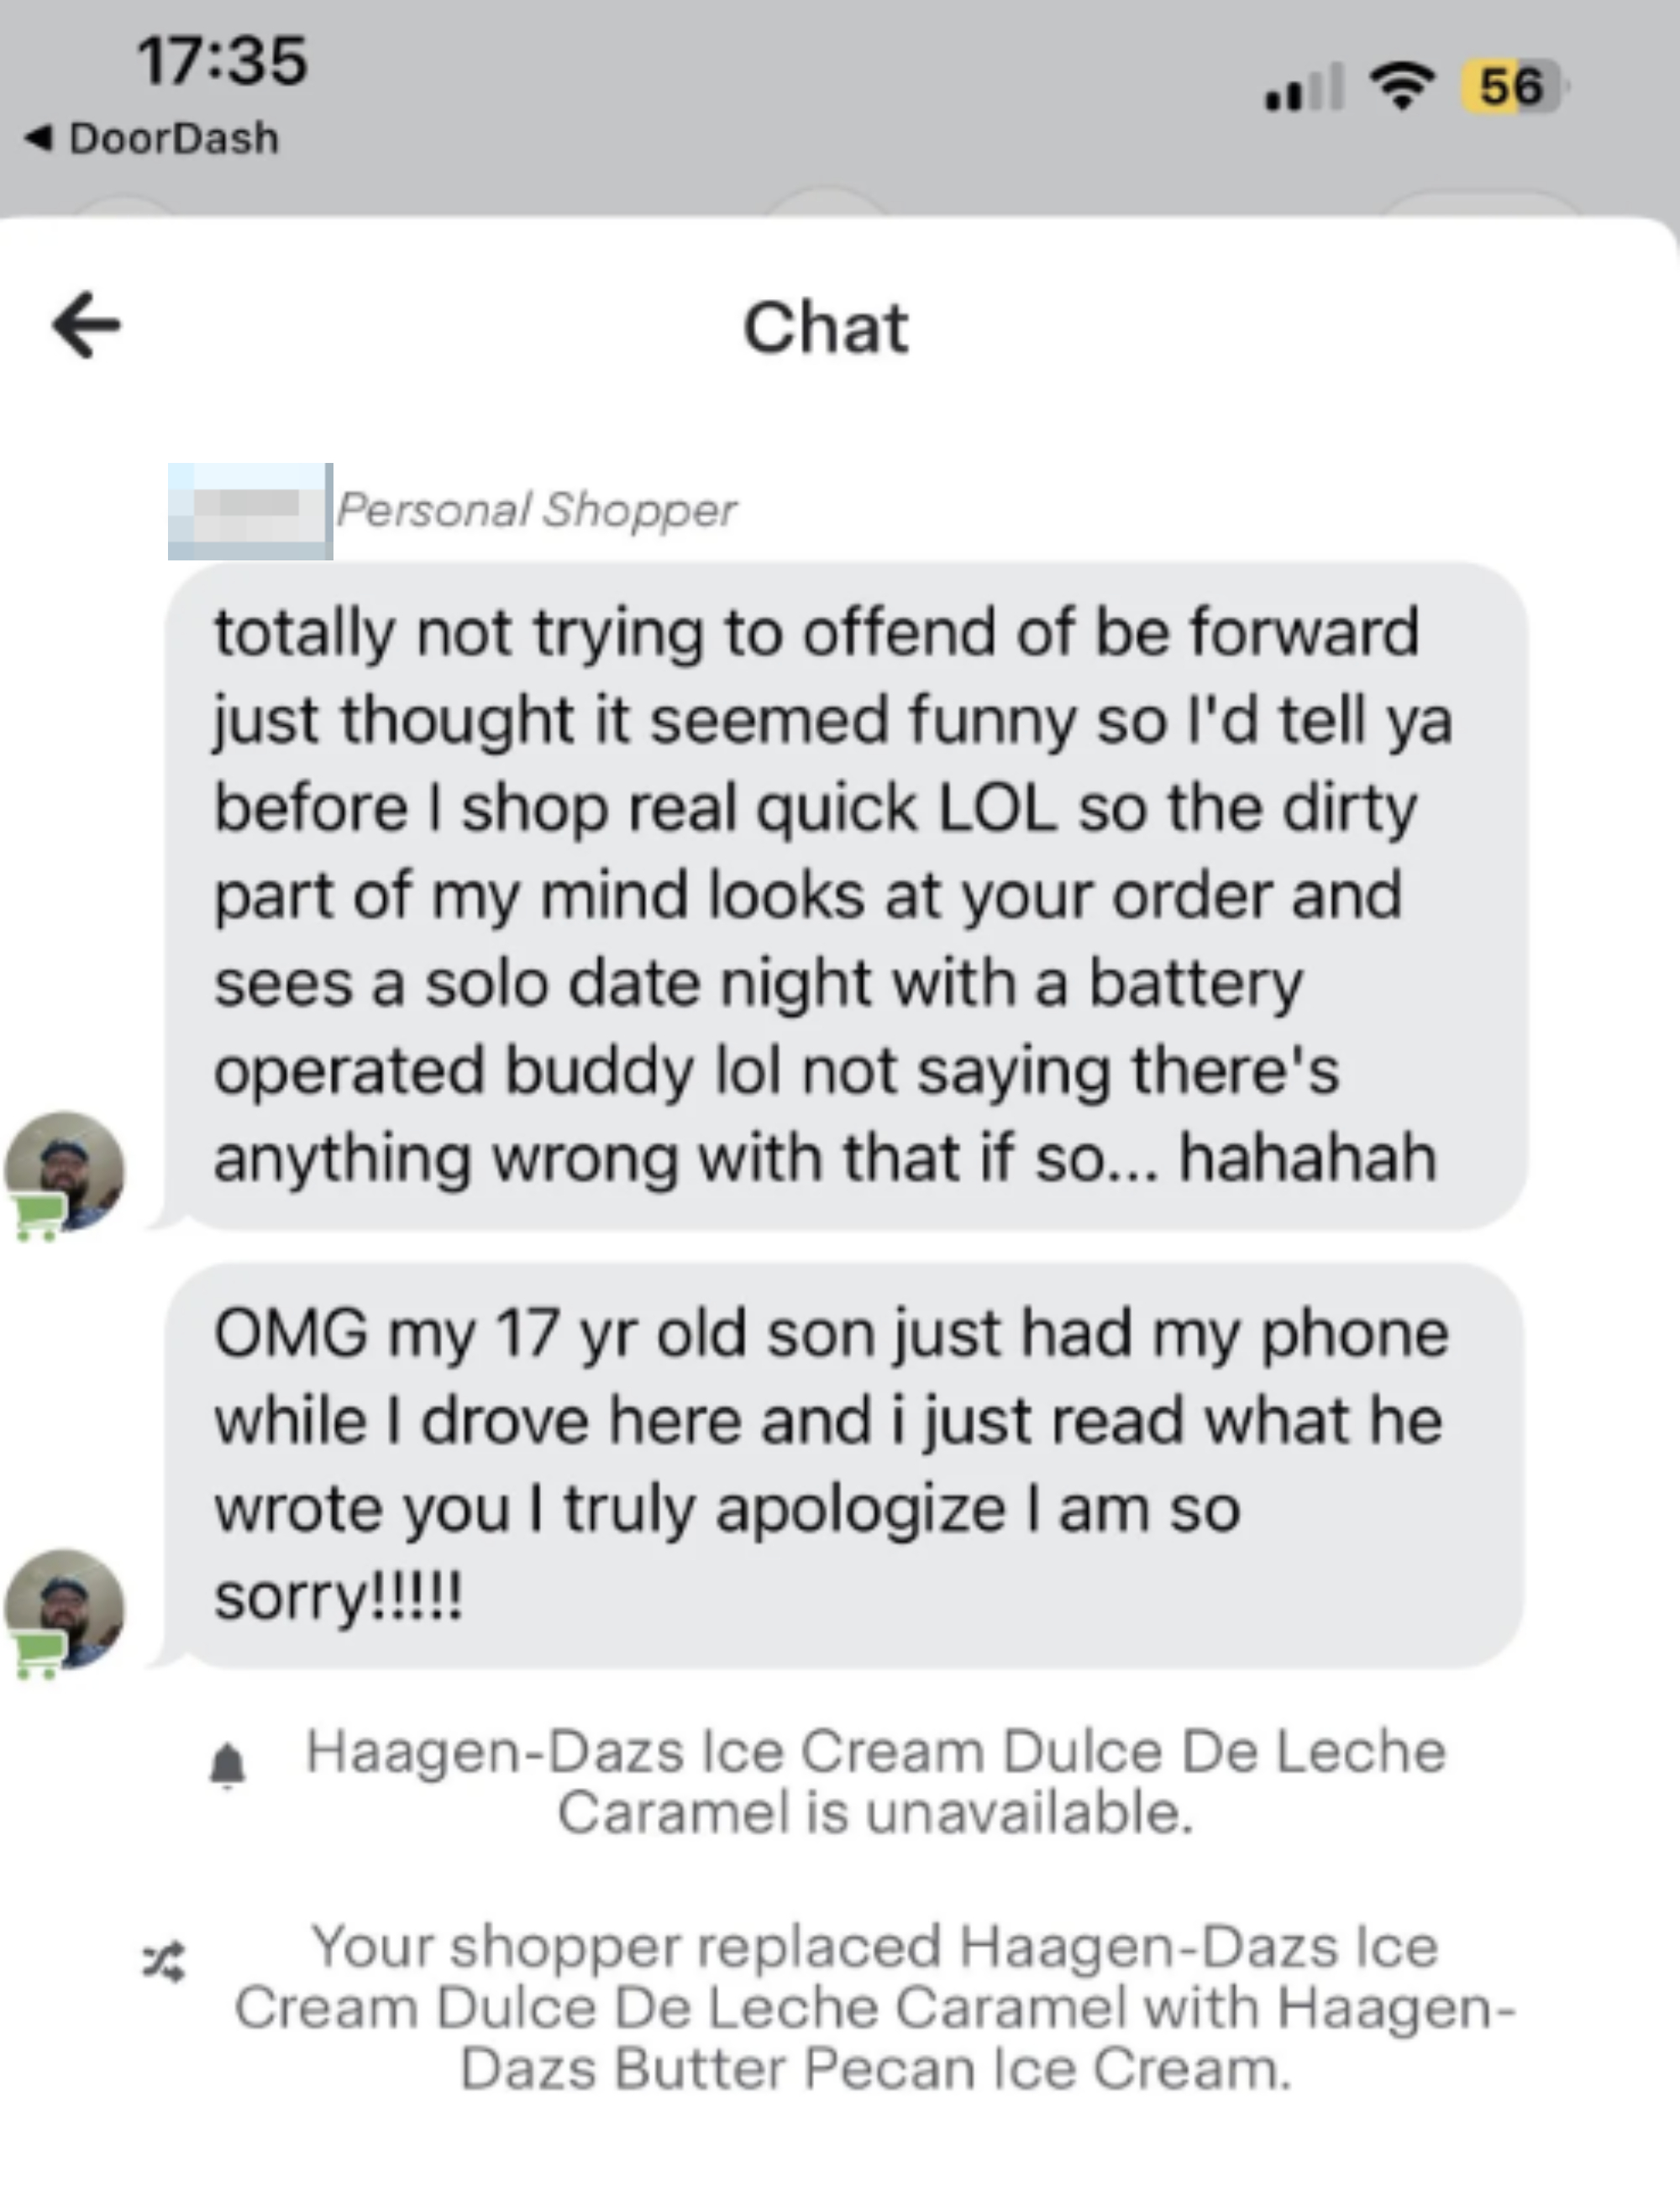 Text message exchange: Person 1 apologizes for their child&#x27;s inappropriate message. Person 2 updates about unavailable Haagen-Dazs ice cream flavor and its replacement